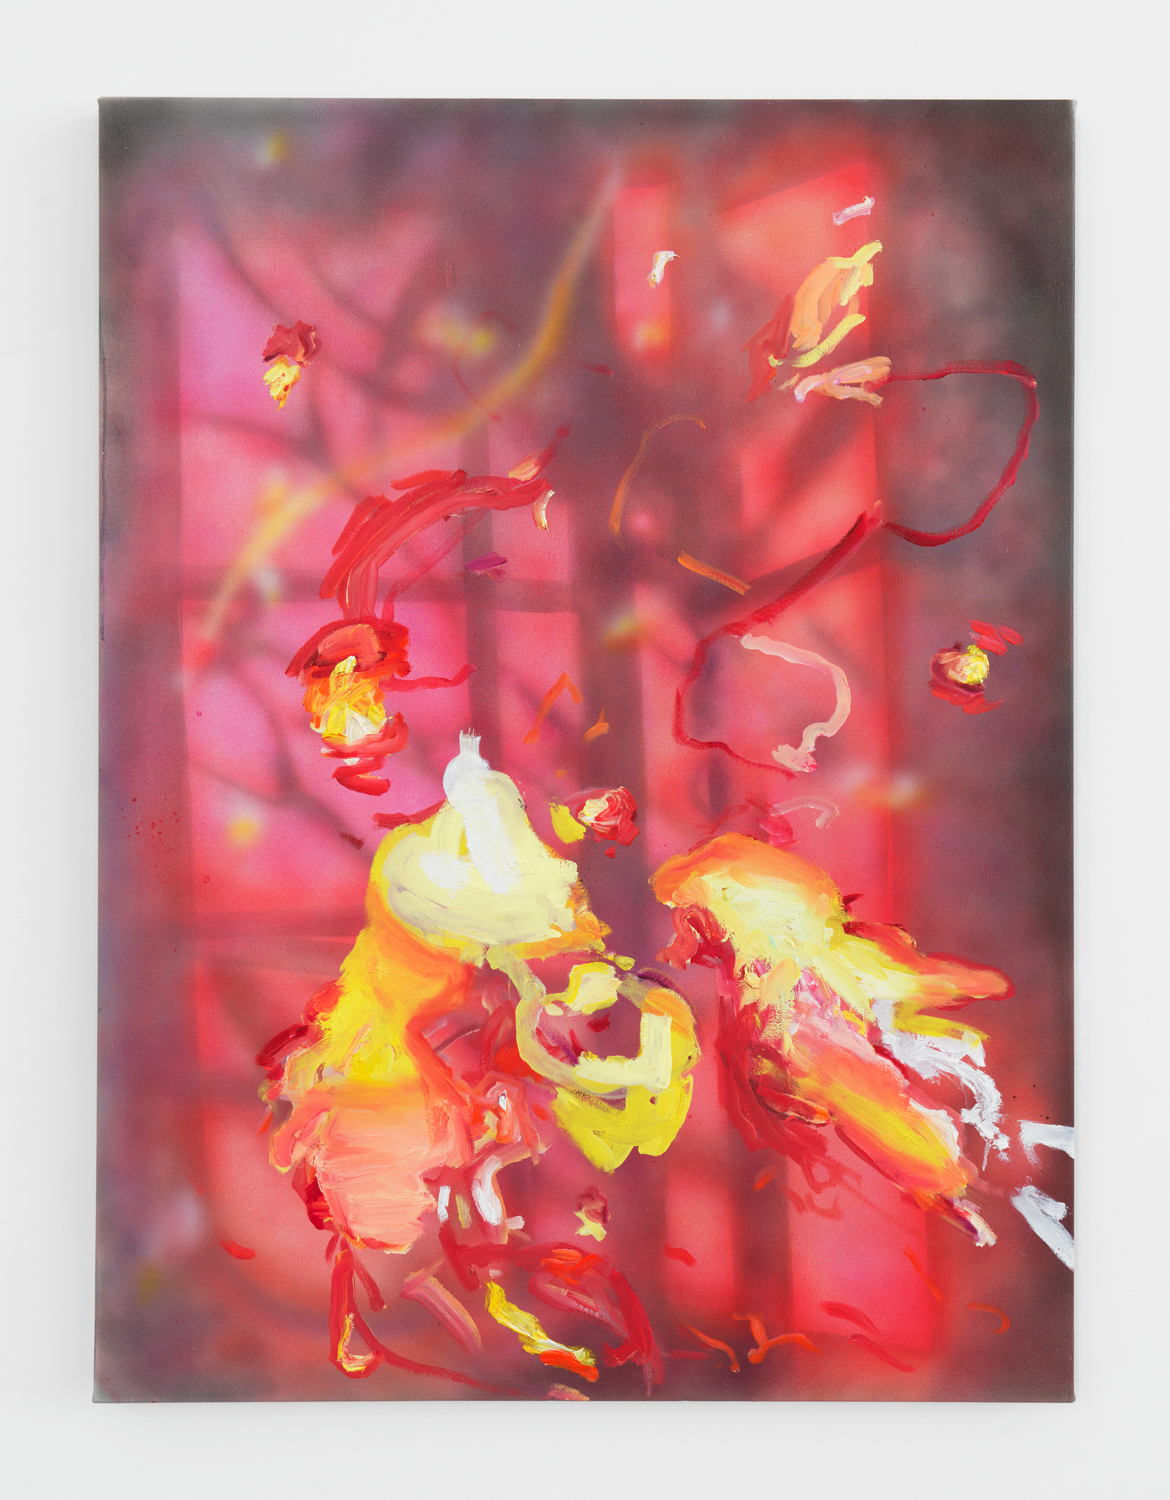 Rachel Rossin, Schmerz, 2021, Oil and airbrushed acrylic on canvas, 40h x 30w in.